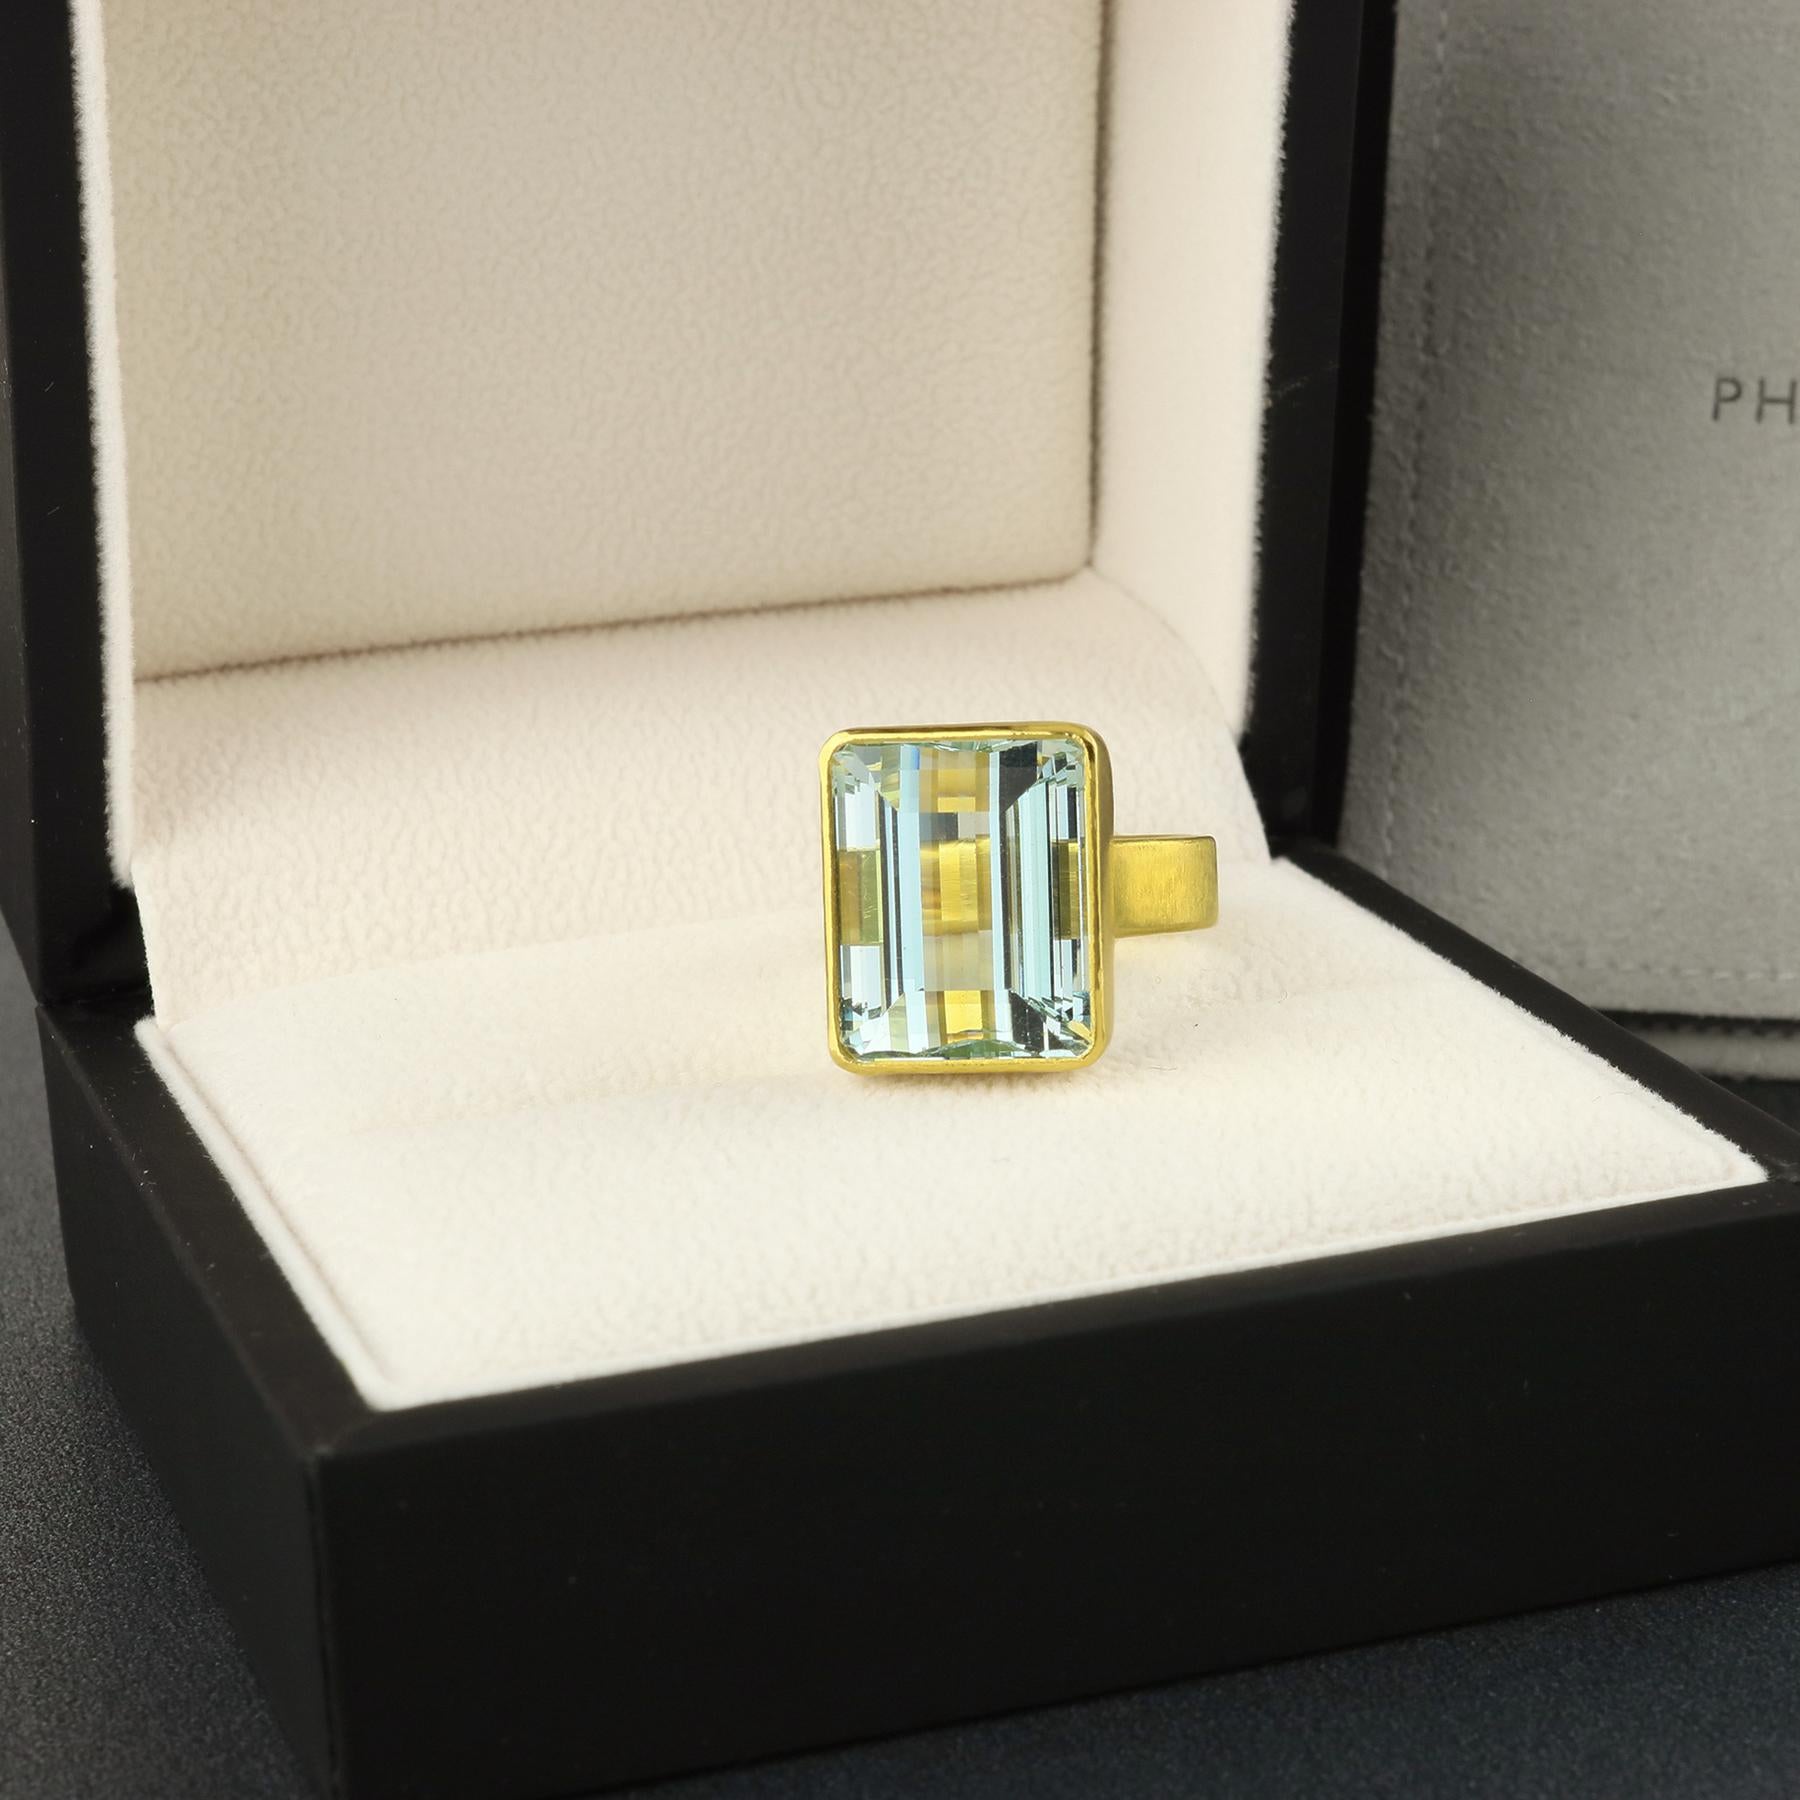 Artisan PHILIPPE SPENCER 20.4 Ct. Extra-Fine Aquamarine in 22K & 20K Gold Statement Ring For Sale